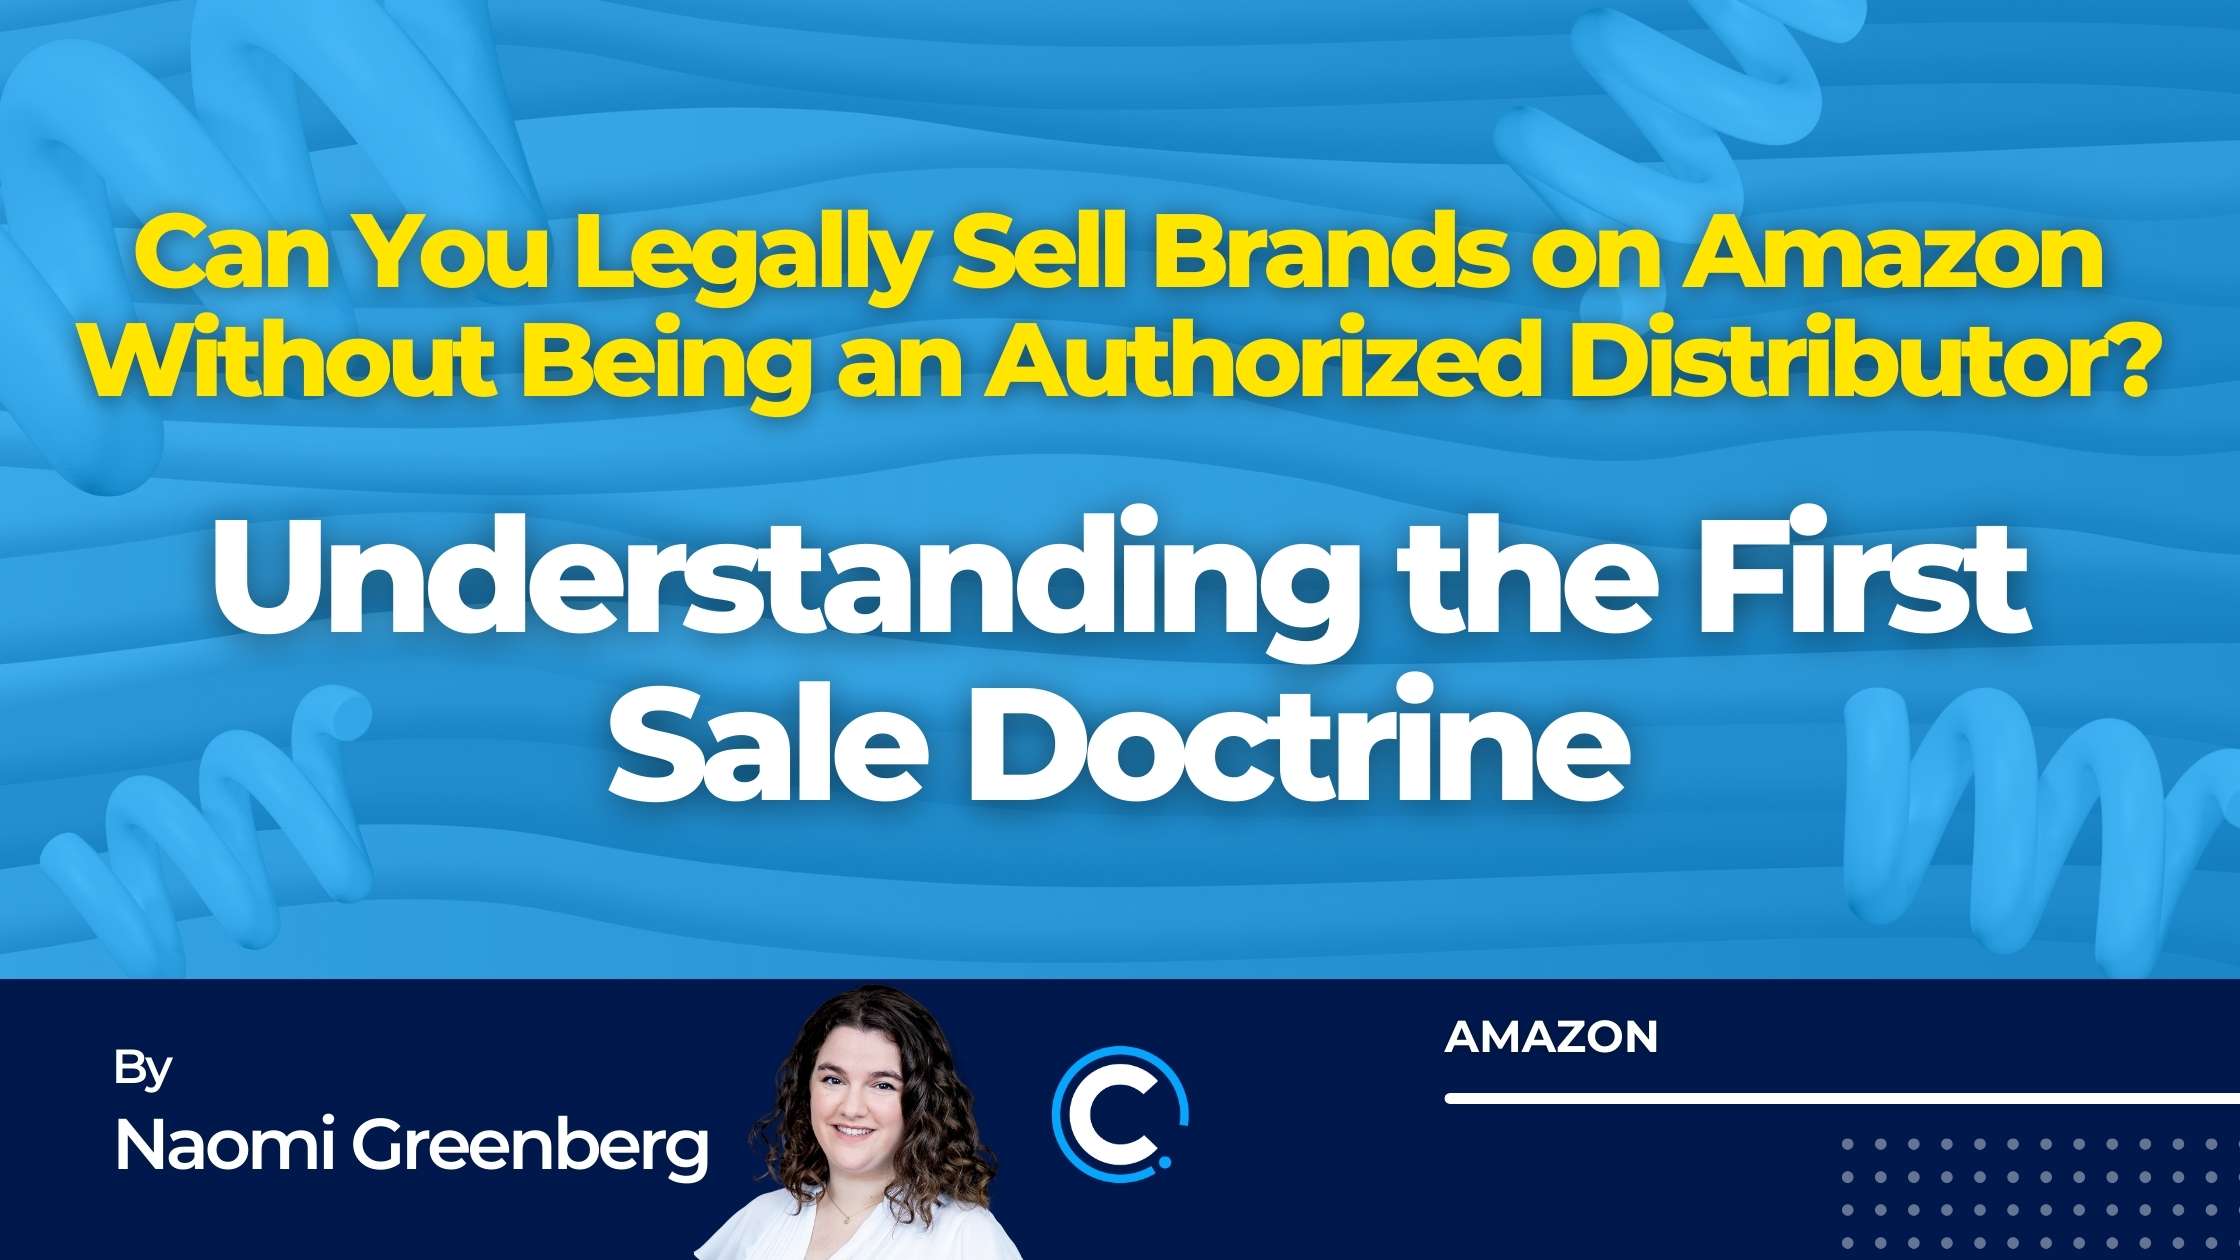 First sale doctrine article cabilly